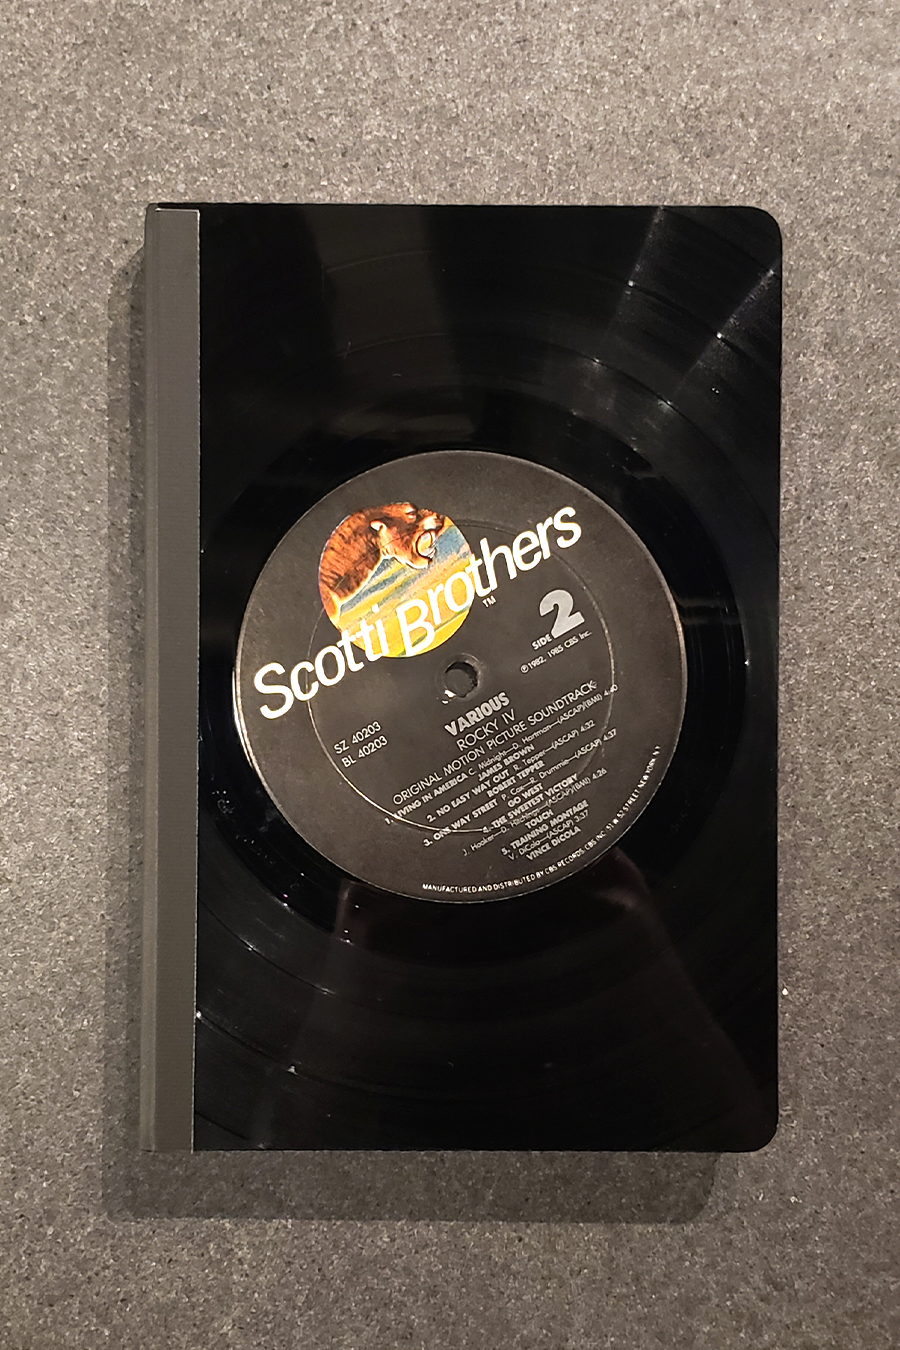 Vinyl Record Journal | Scotti Brothers - Main Image Number 1 of 1